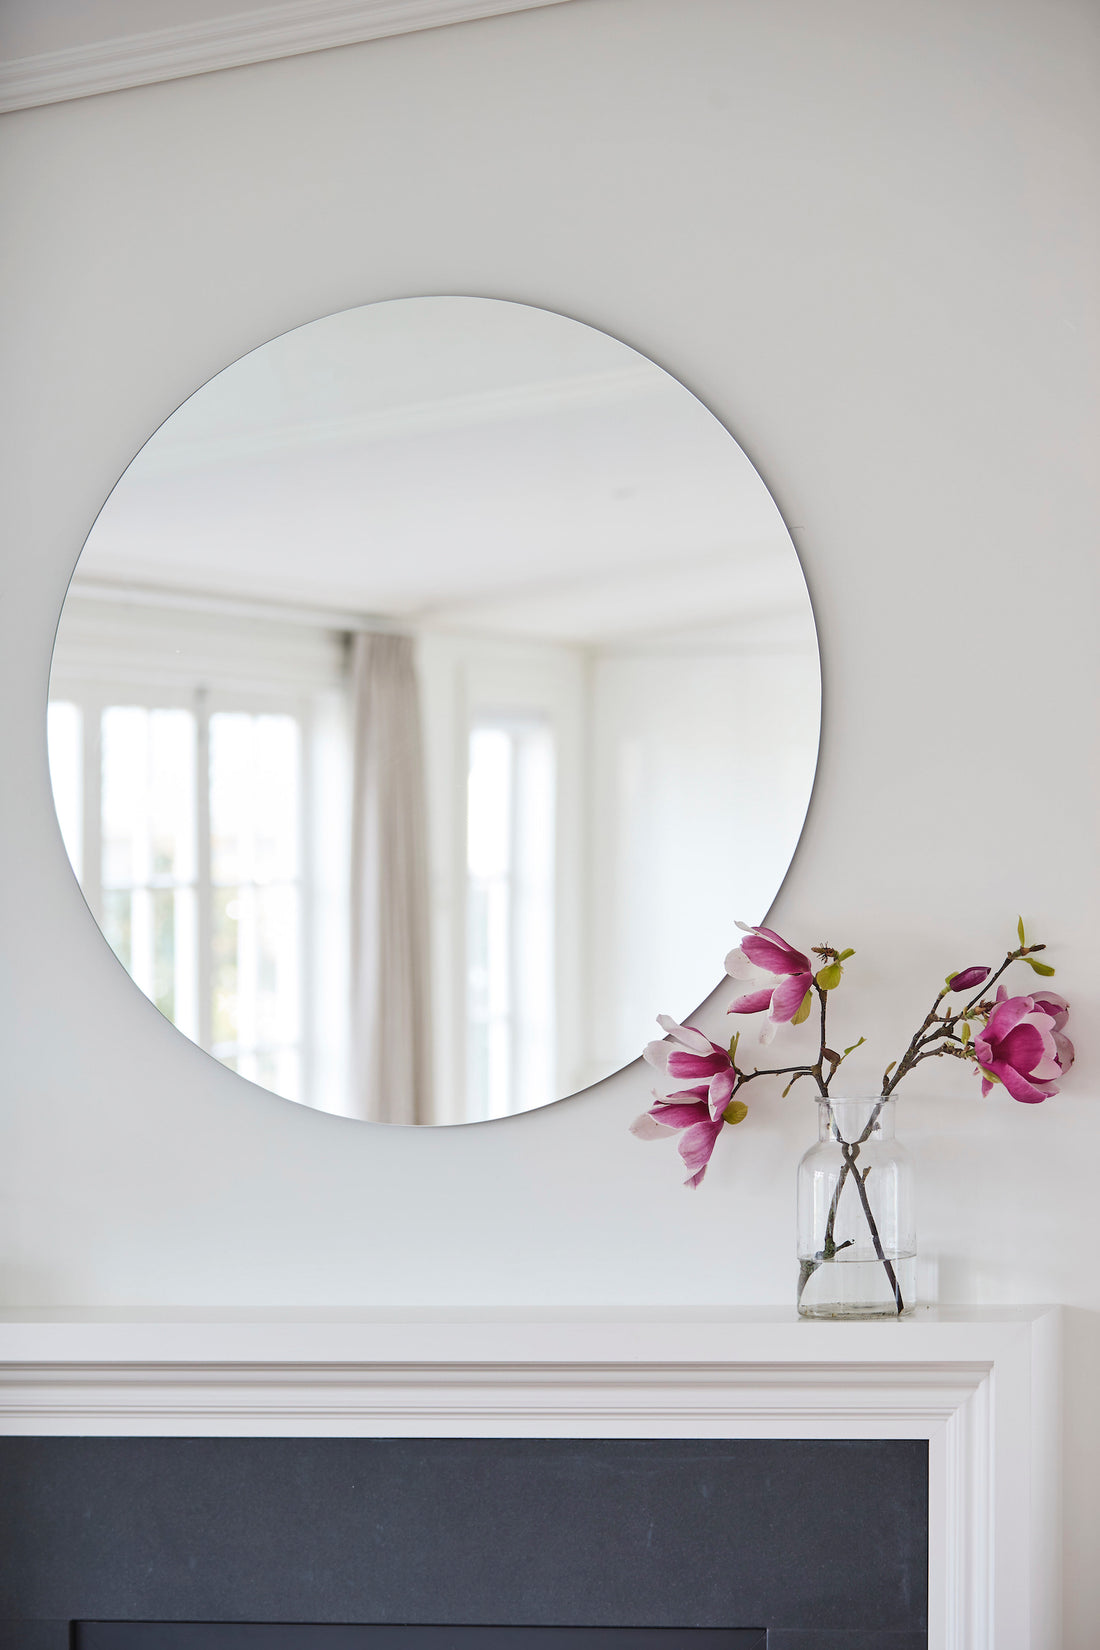 Where to place your mirror on the wall